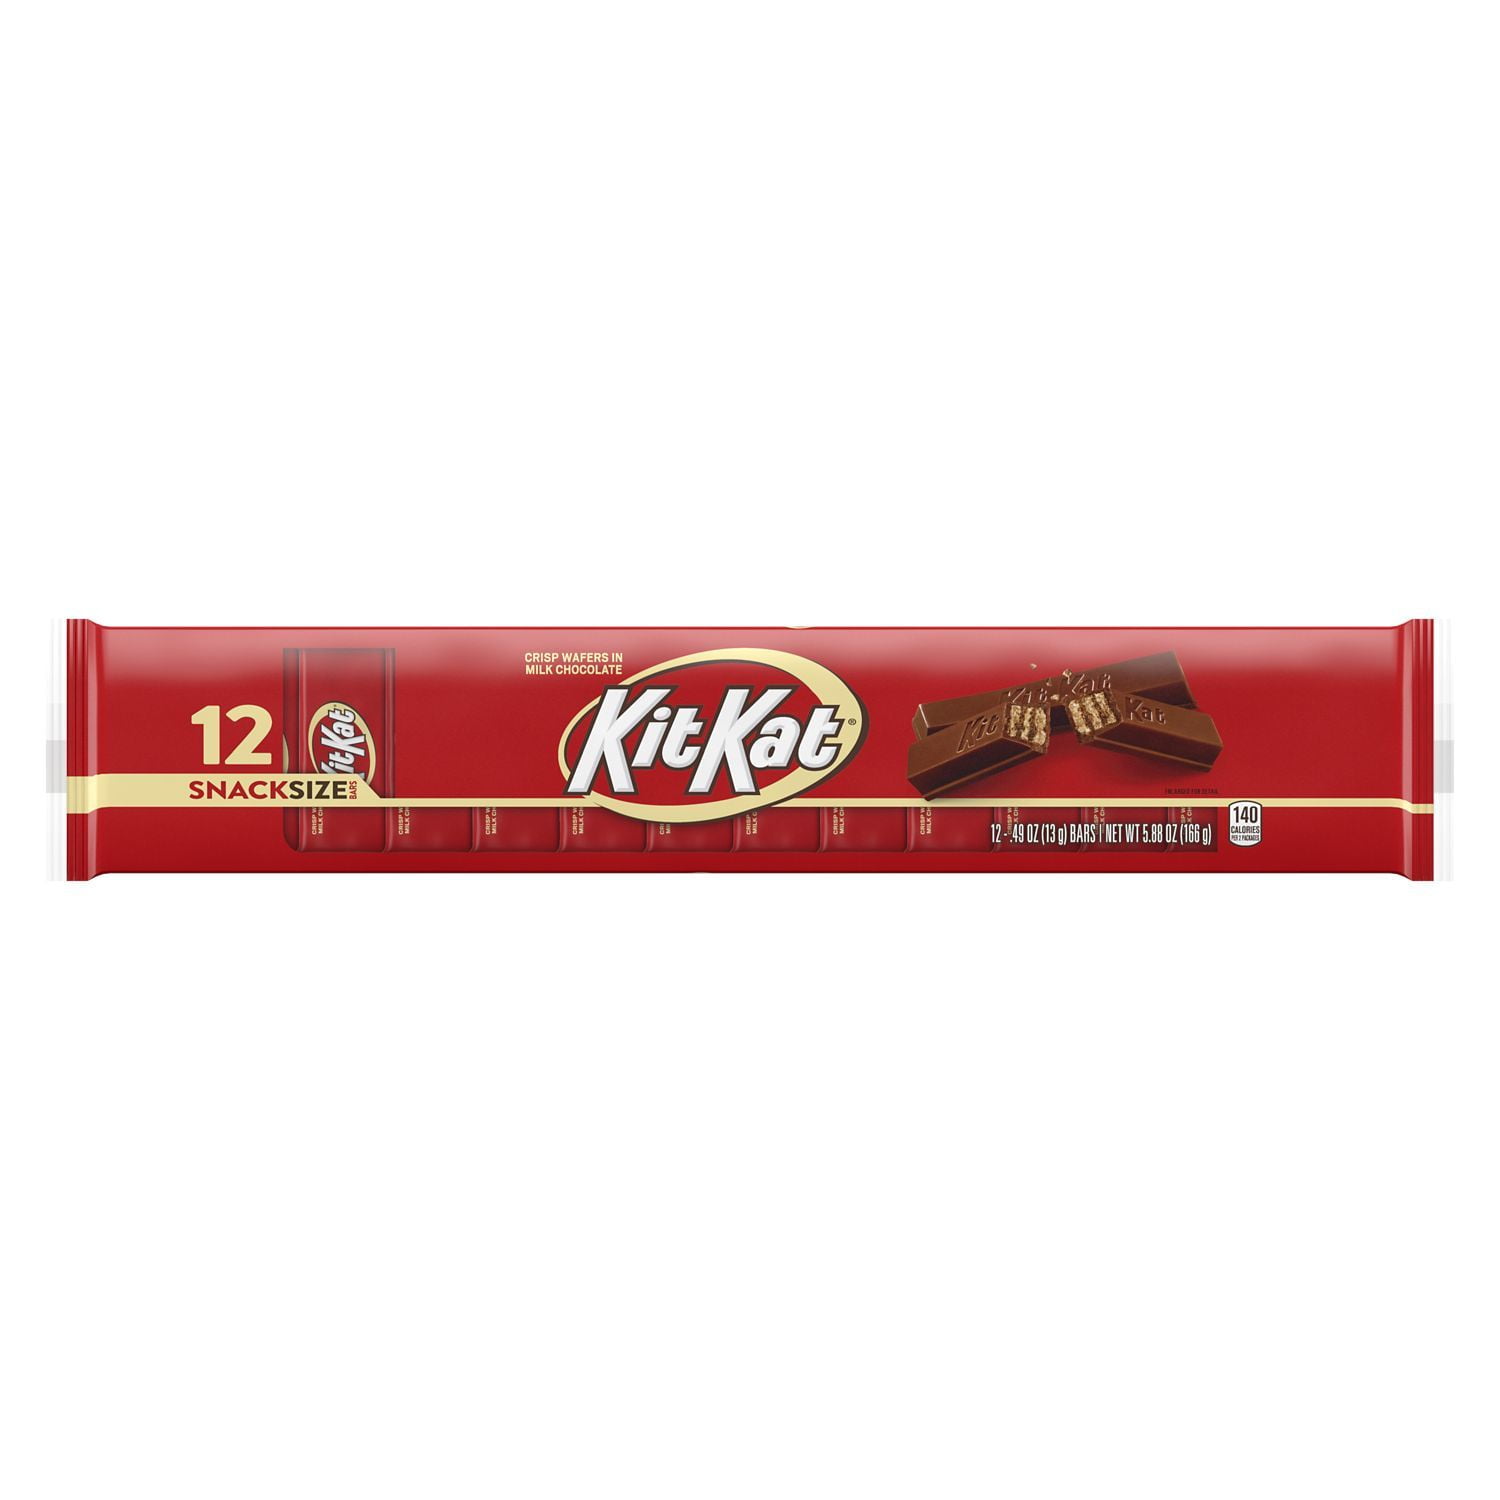 KIT KAT, Milk Chocolate Snack Size Wafer Candy, 0.49 oz, Bars (12 Count)